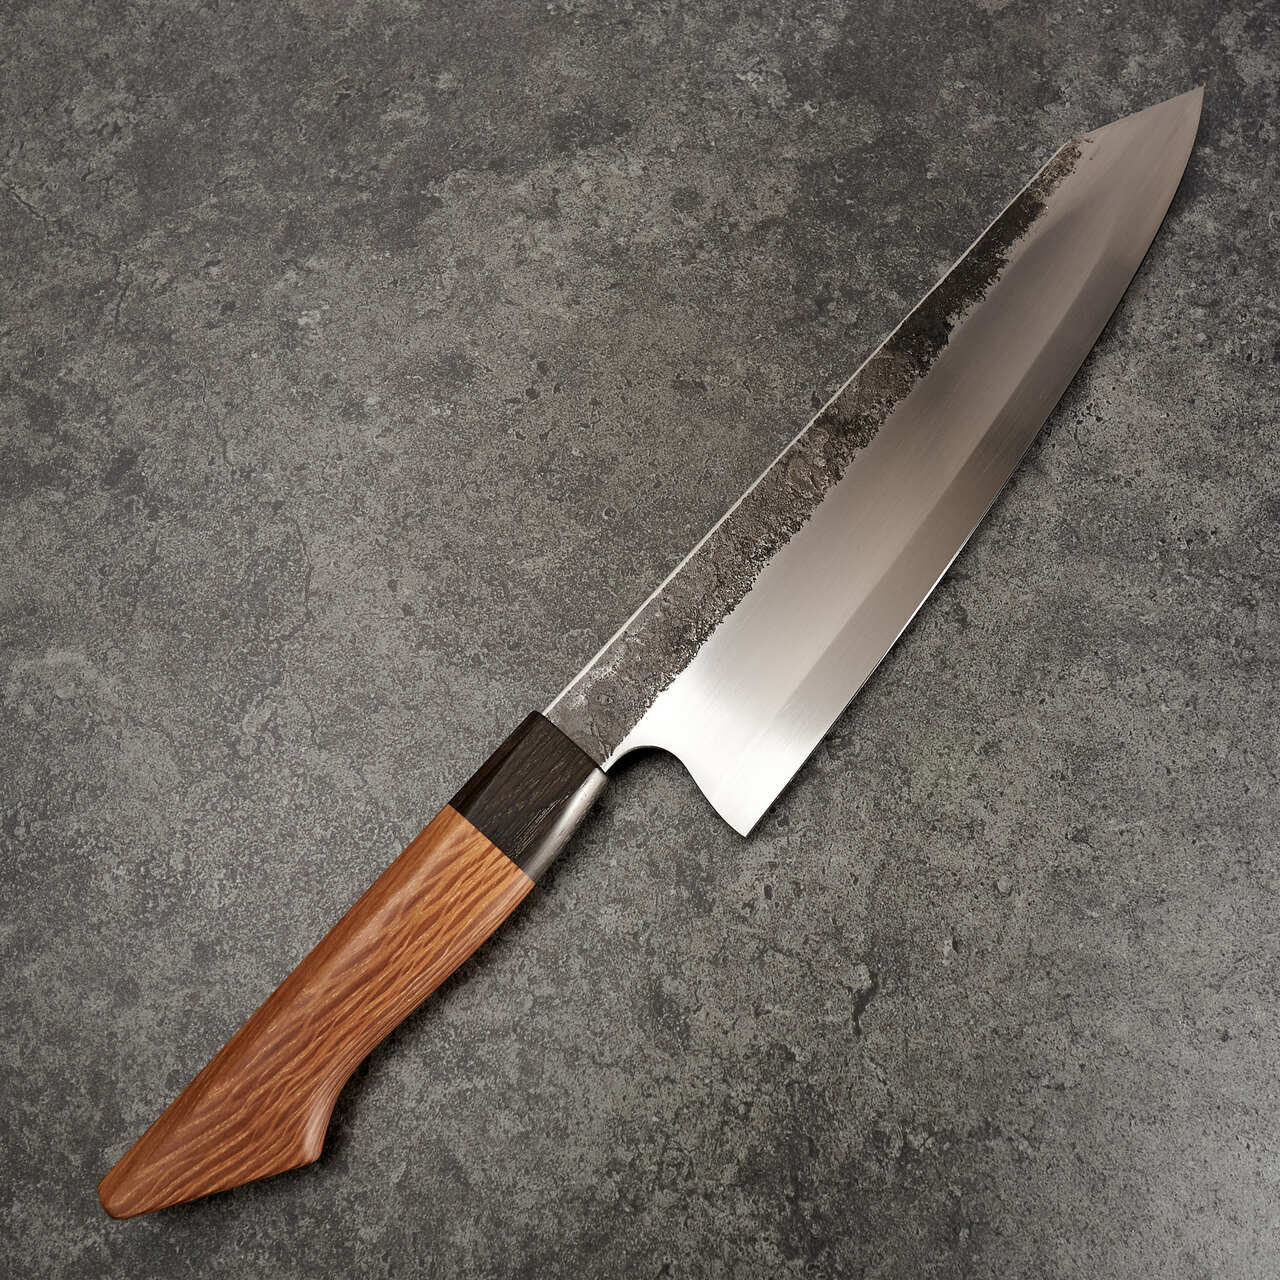 Lew Griffin Gyuto 250mm 52100 Carbon Steel - "S" Grind with Saya - Blade